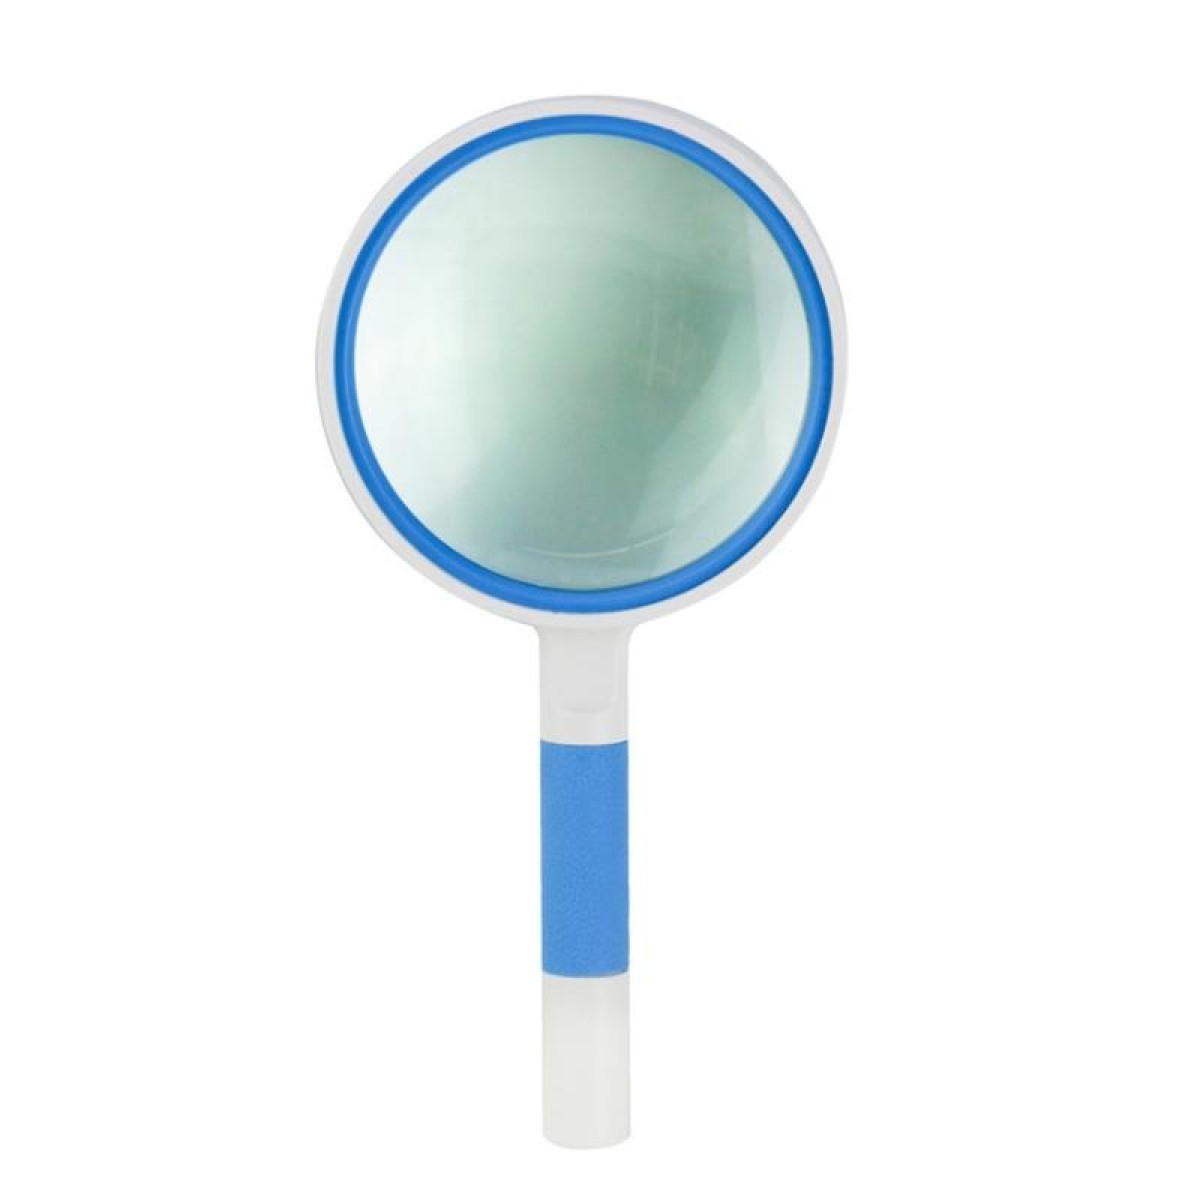 Hand-Held Reading Magnifier Glass Lens Anti-Skid Handle Old Man Reading Repair Identification Magnifying Glass, Specification: 85mm 10 Times (Blue White)